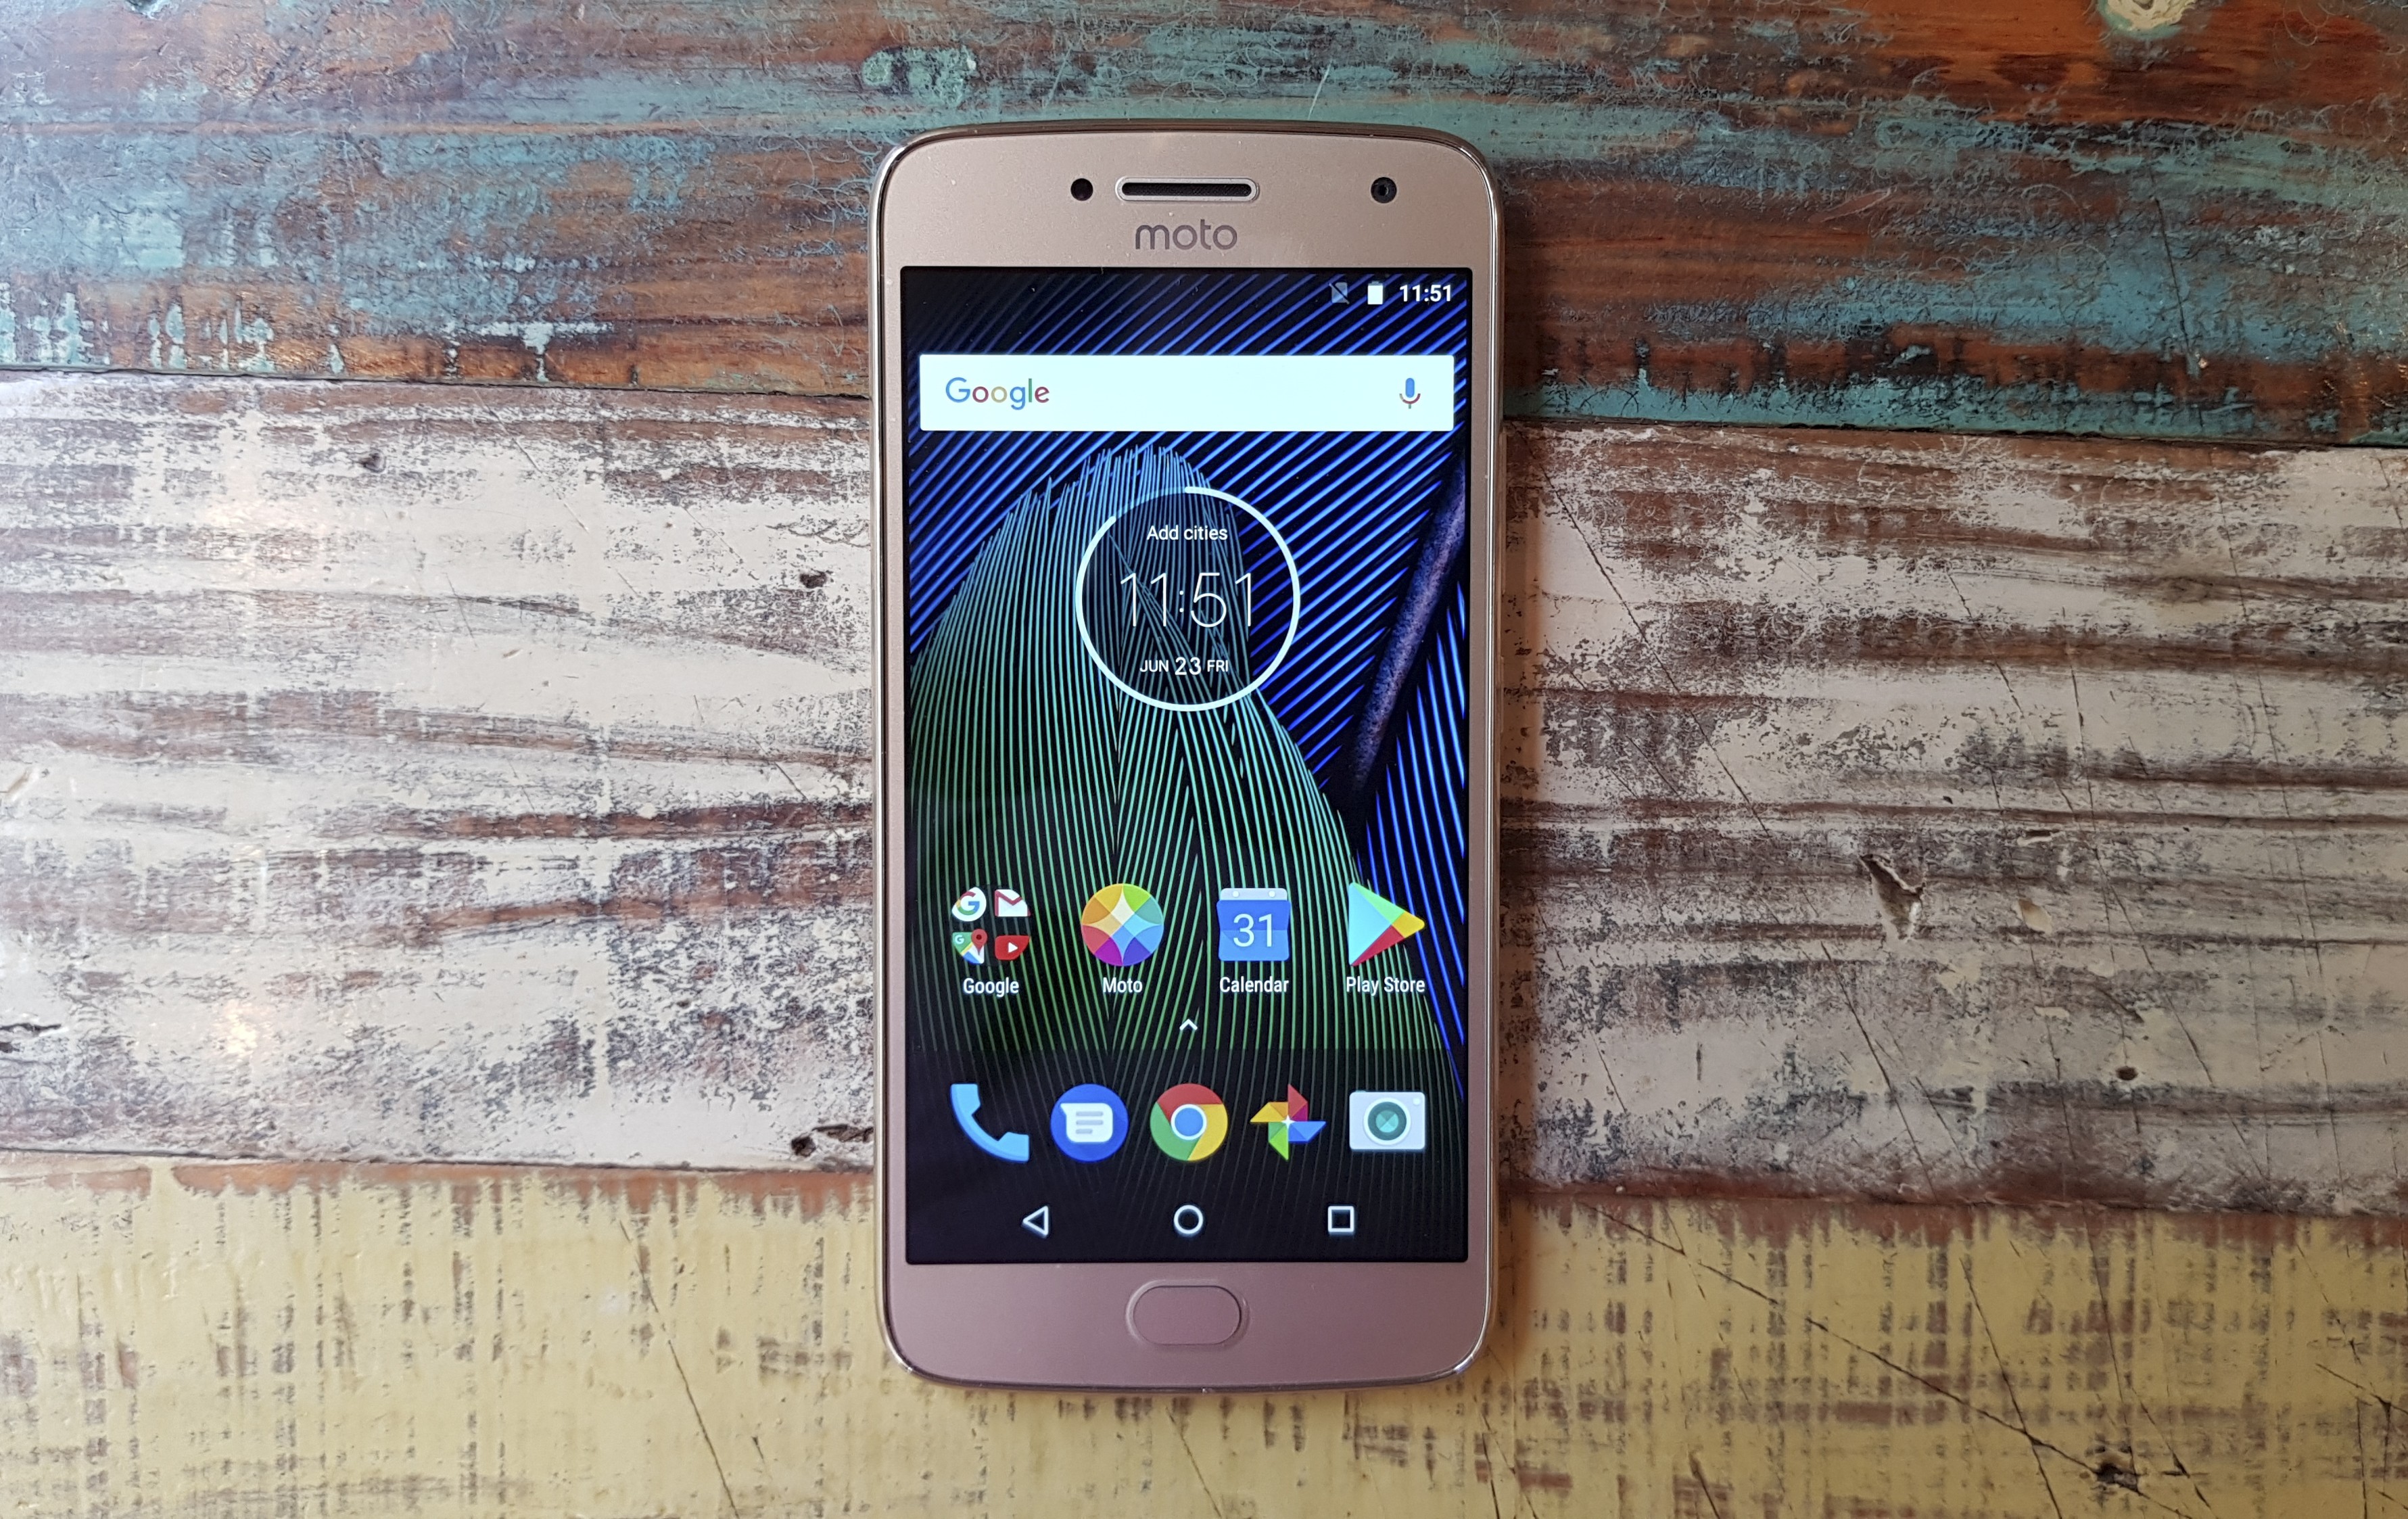 The Moto G5 Plus is the latest mid-range Android device by Motorola and is priced at just HK$2,000. Photo: Ben Sin